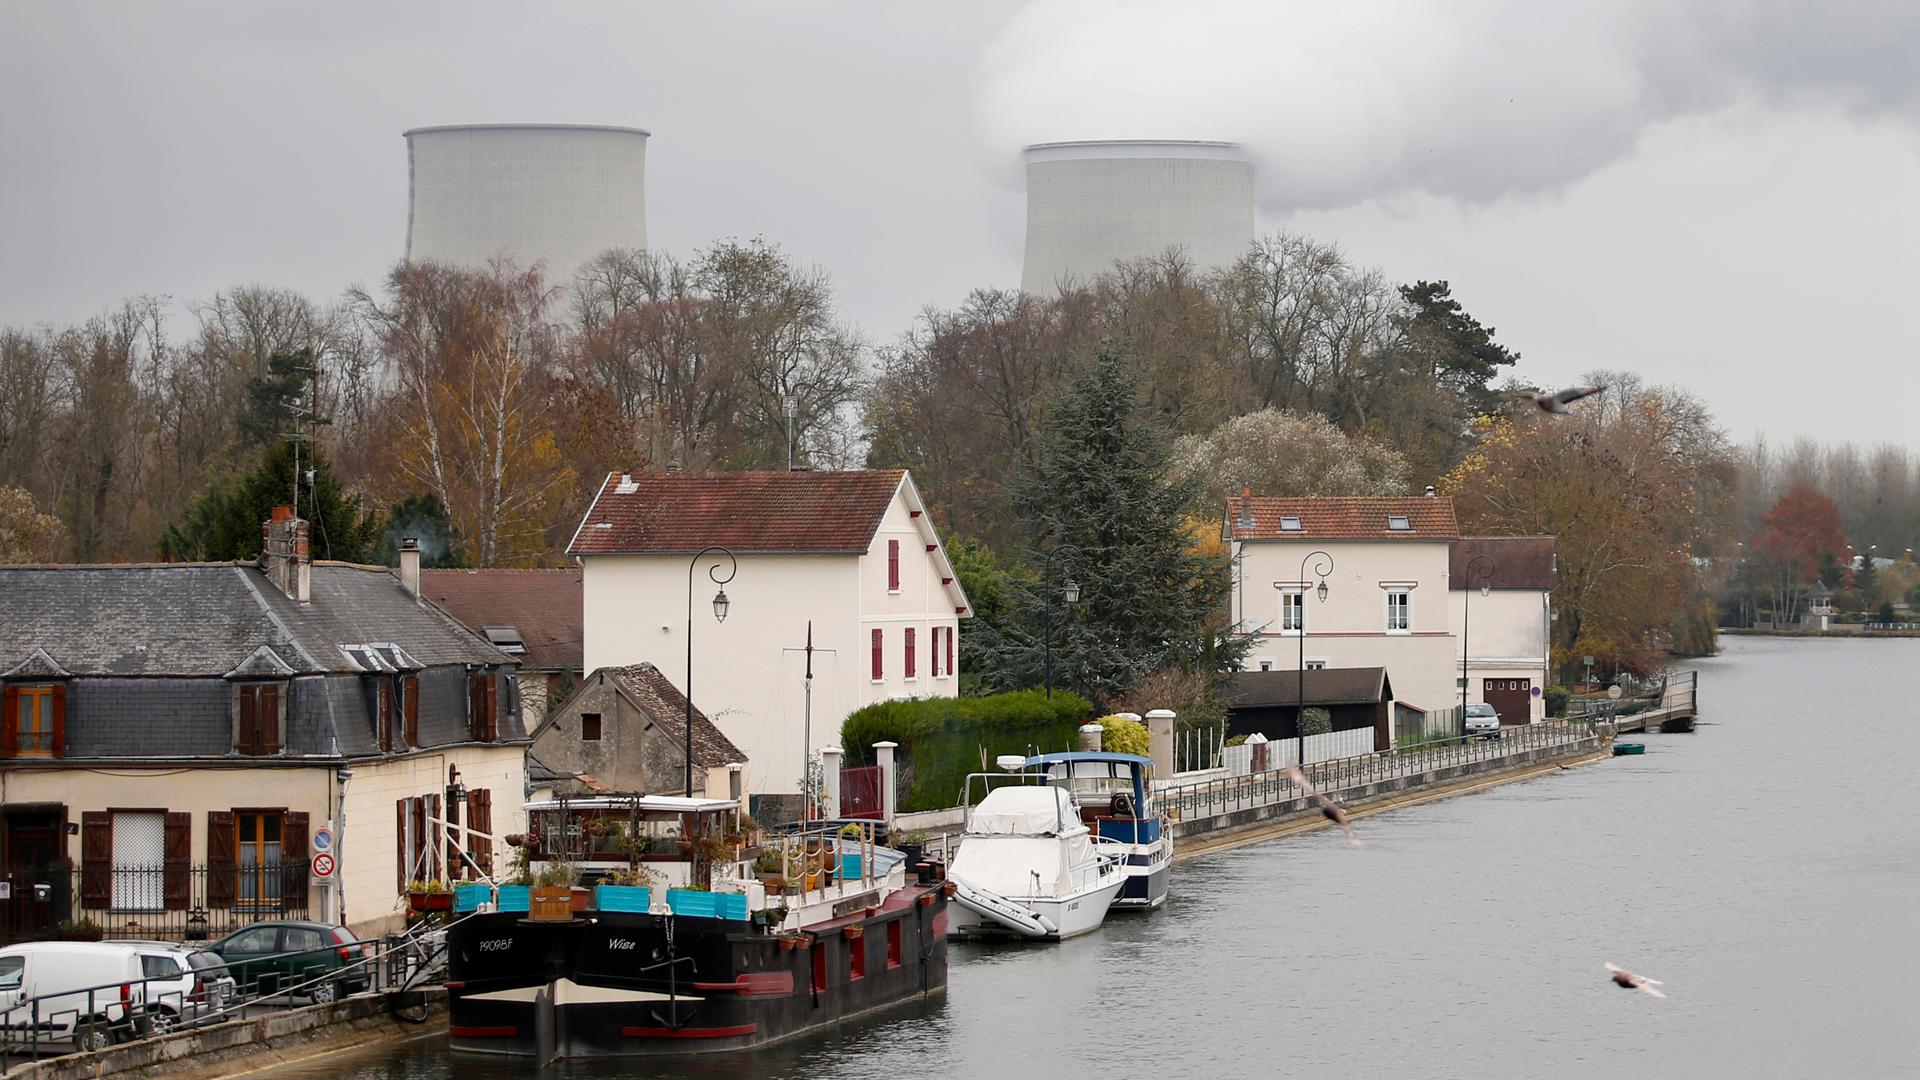 Steam rises from the cooling towers of the Electricite de France (EDF) nuclear power station at Nogent-Sur-Seine, France. The nuclear industry, and some of the world's top climate scientists, are arguing at the Paris climate talks that nuclear energy must